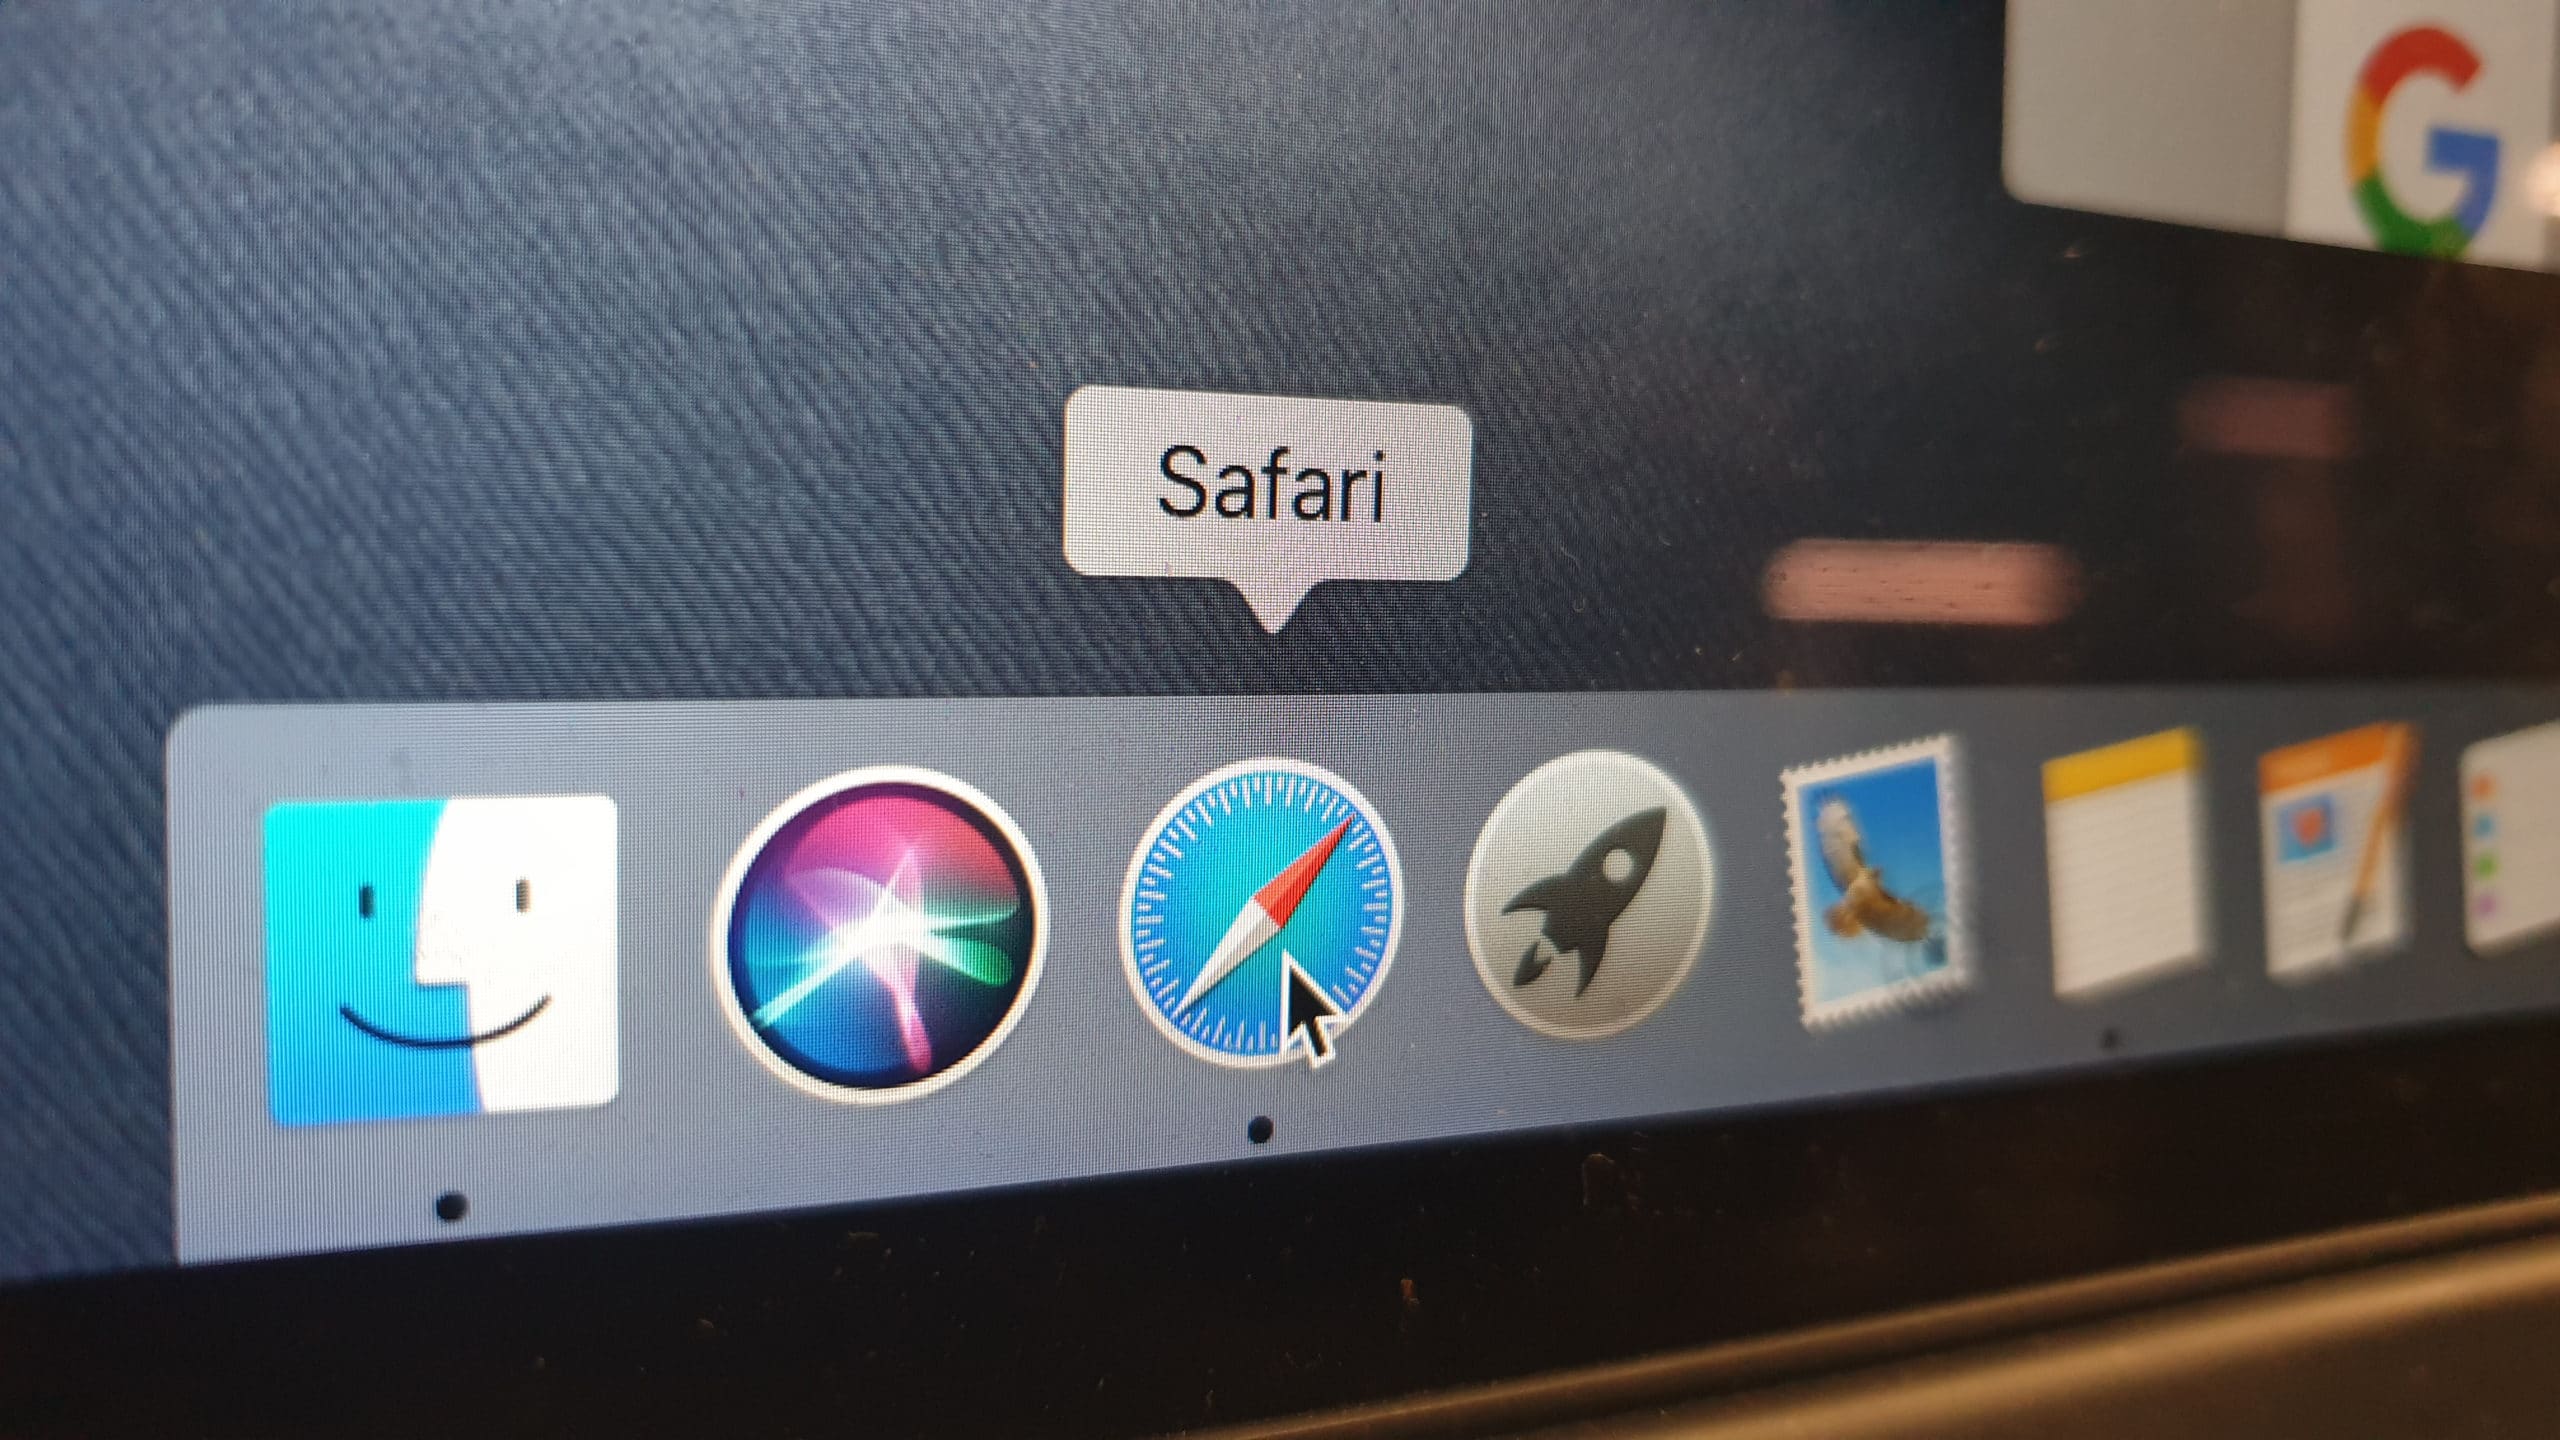 Agreement for Google to be Safari's default search engine targeted by British regulator